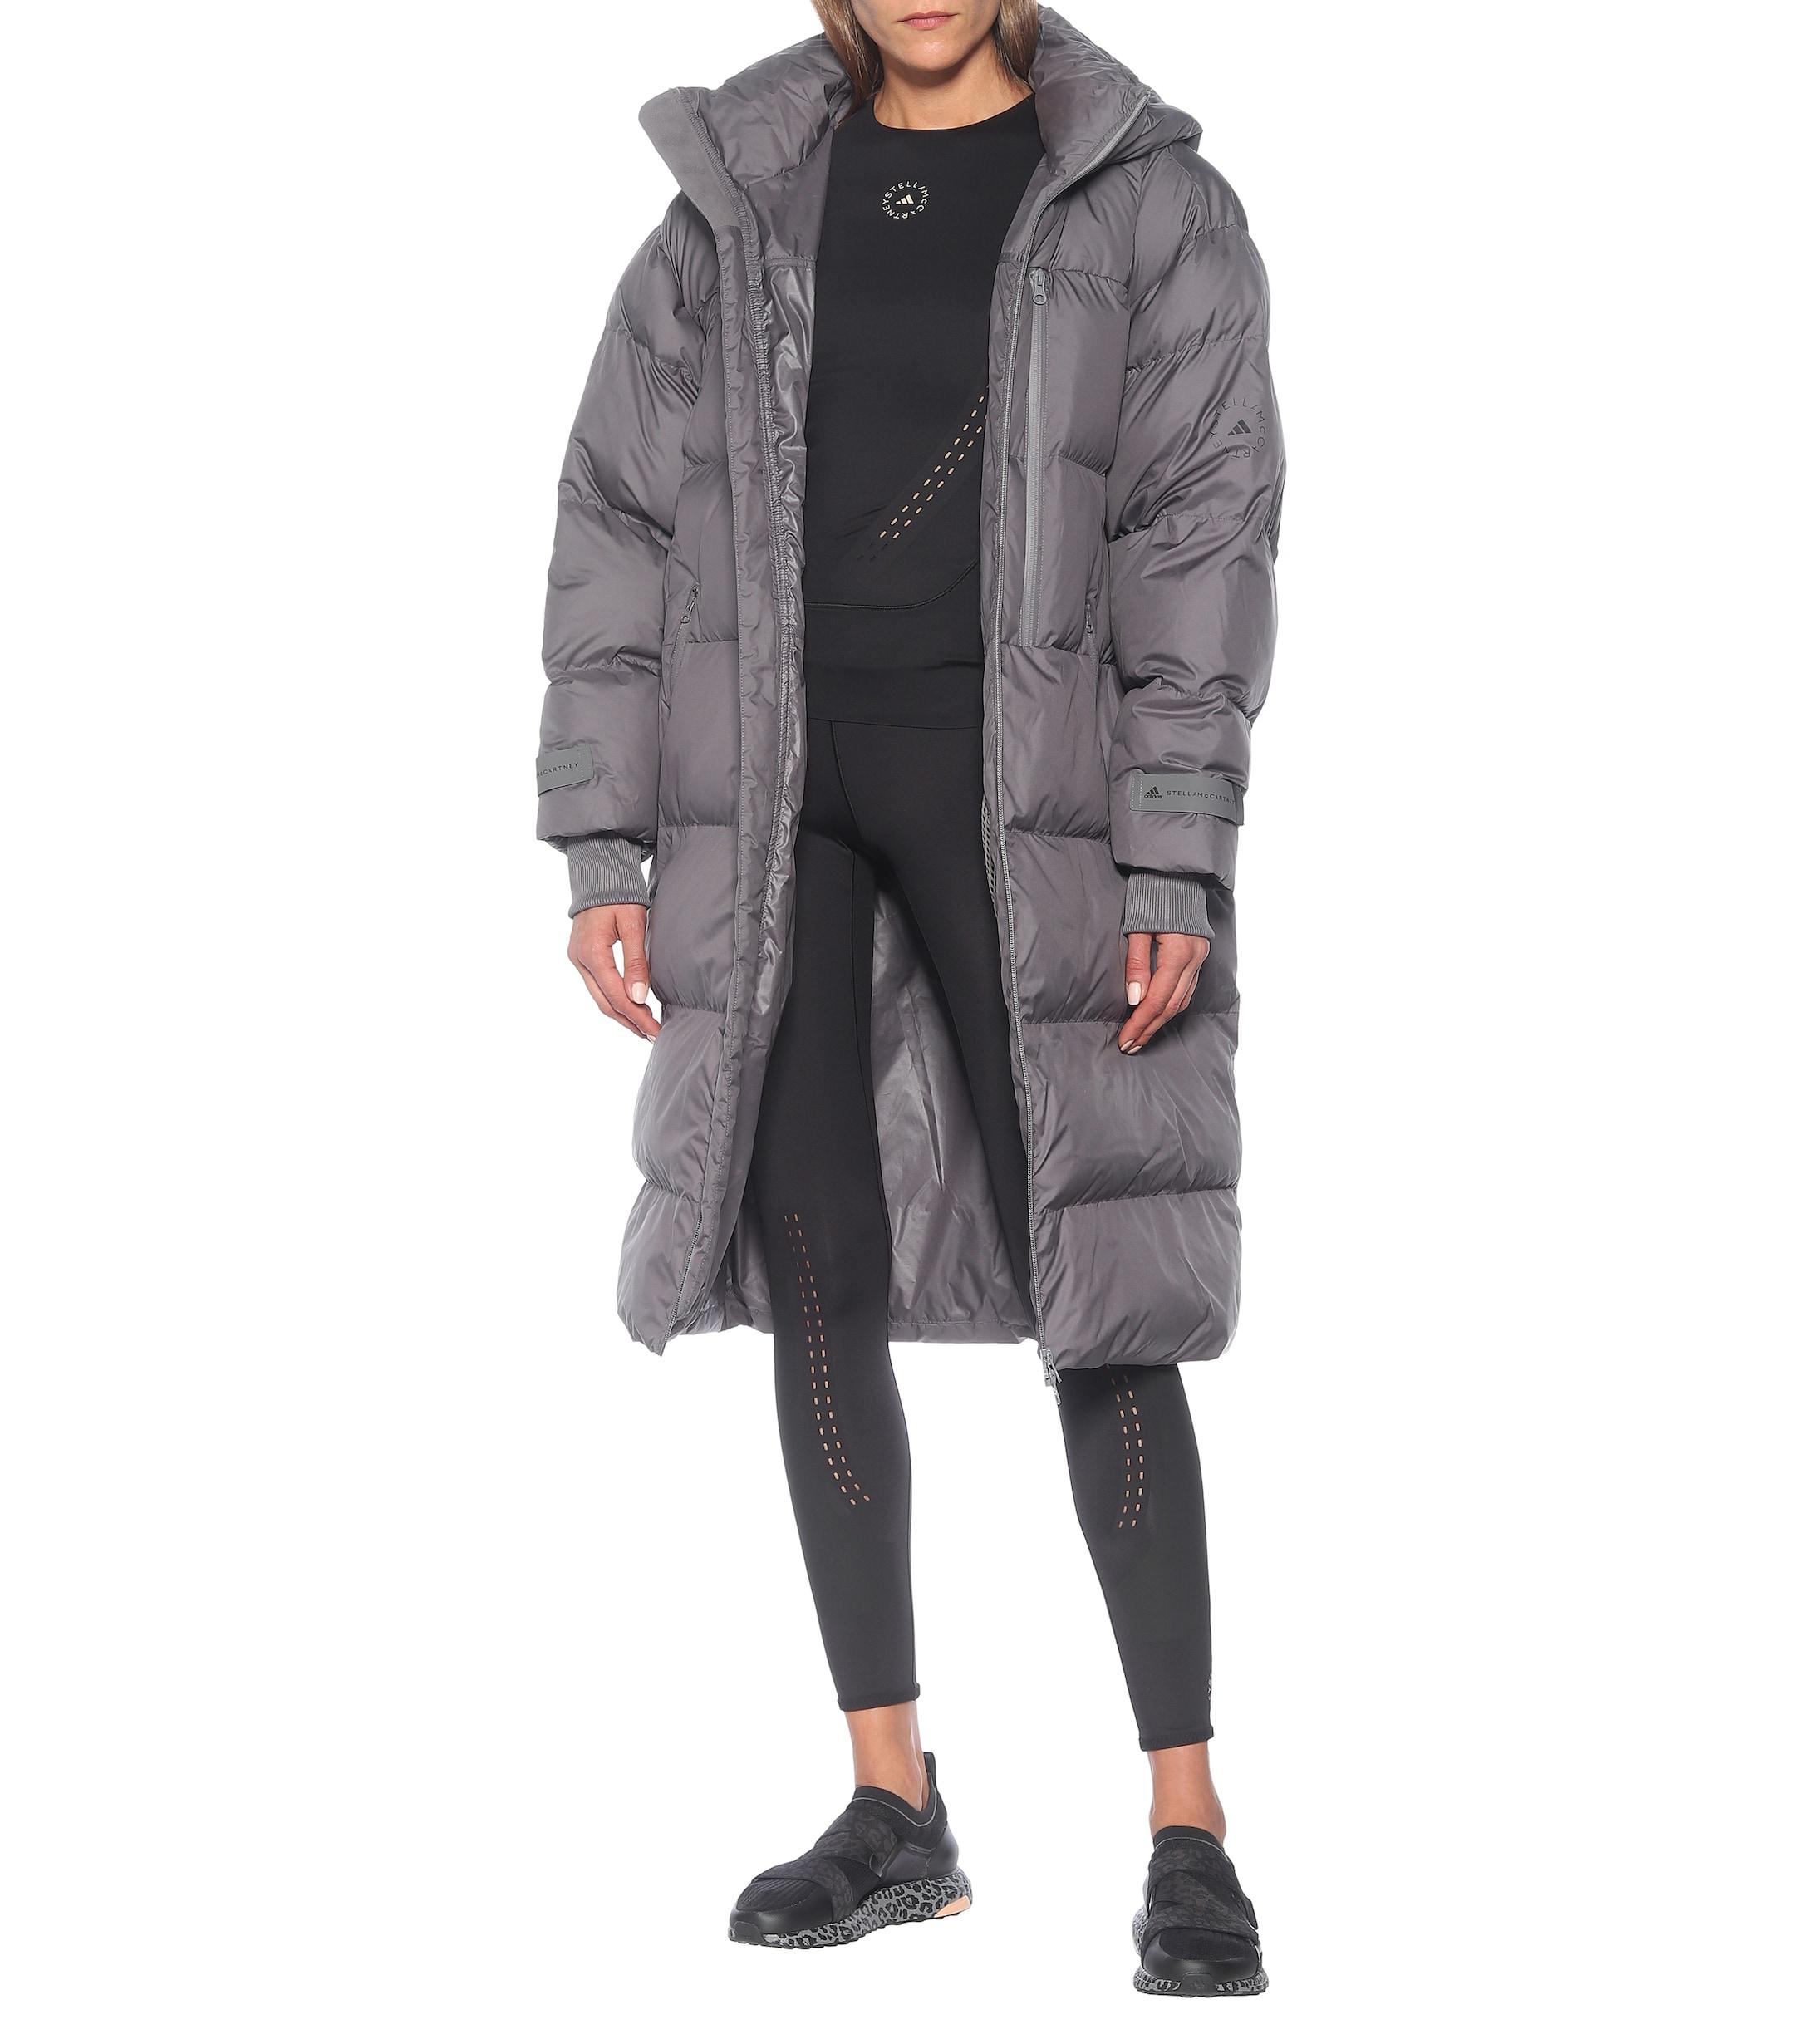 adidas By Stella McCartney Quilted Puffer Coat in Grey (Gray) - Lyst